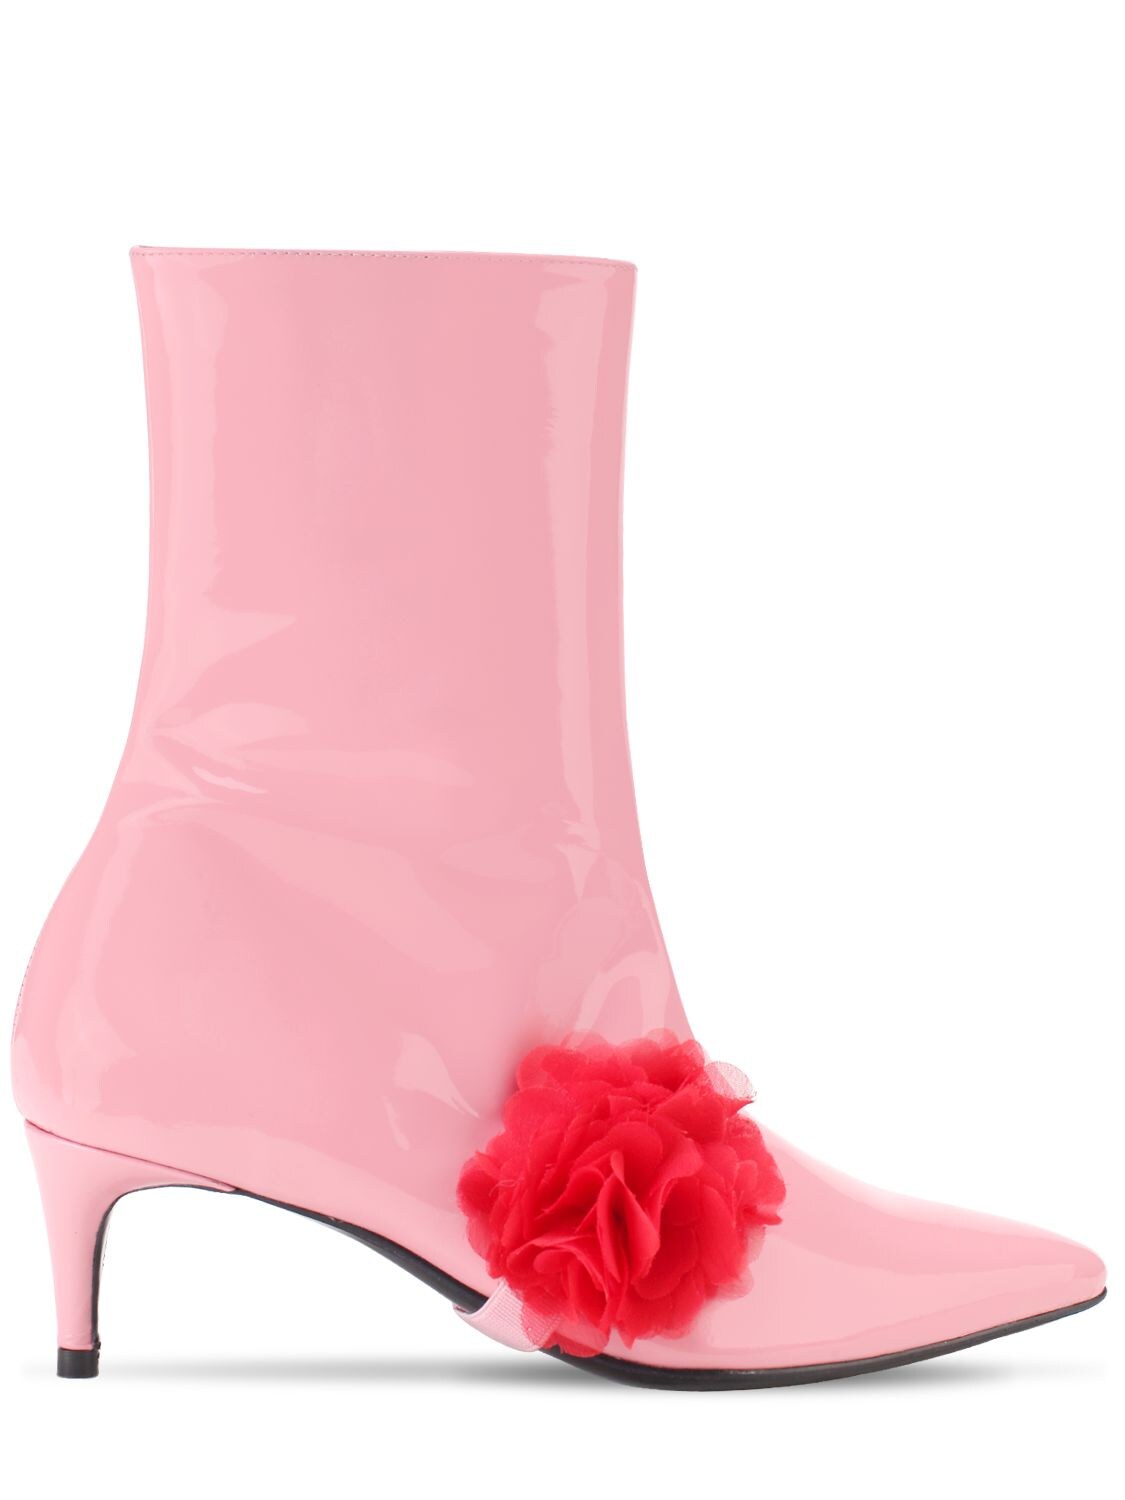 Leandra Medine 55mm Patent Leather Ankle Boots In Pink